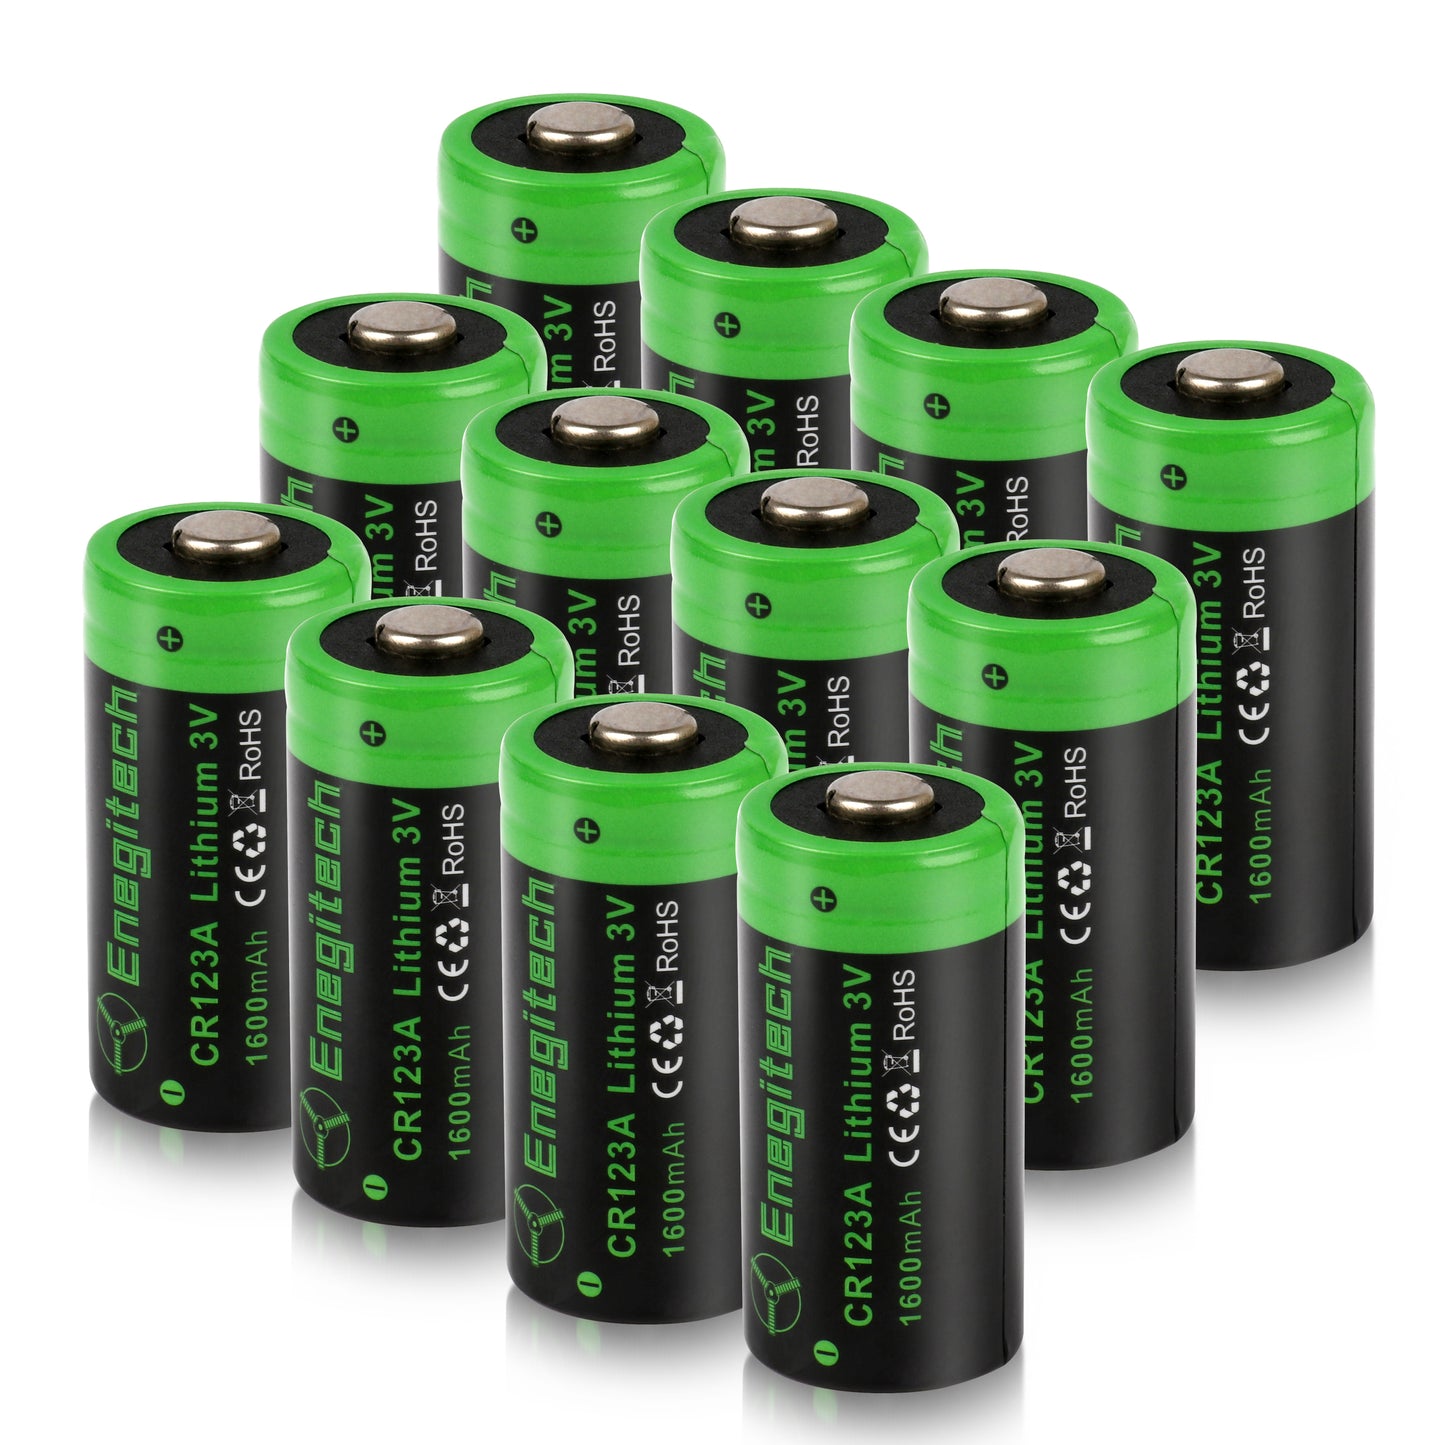 Streamlight CR123A Lithium Batteries 12-Pack